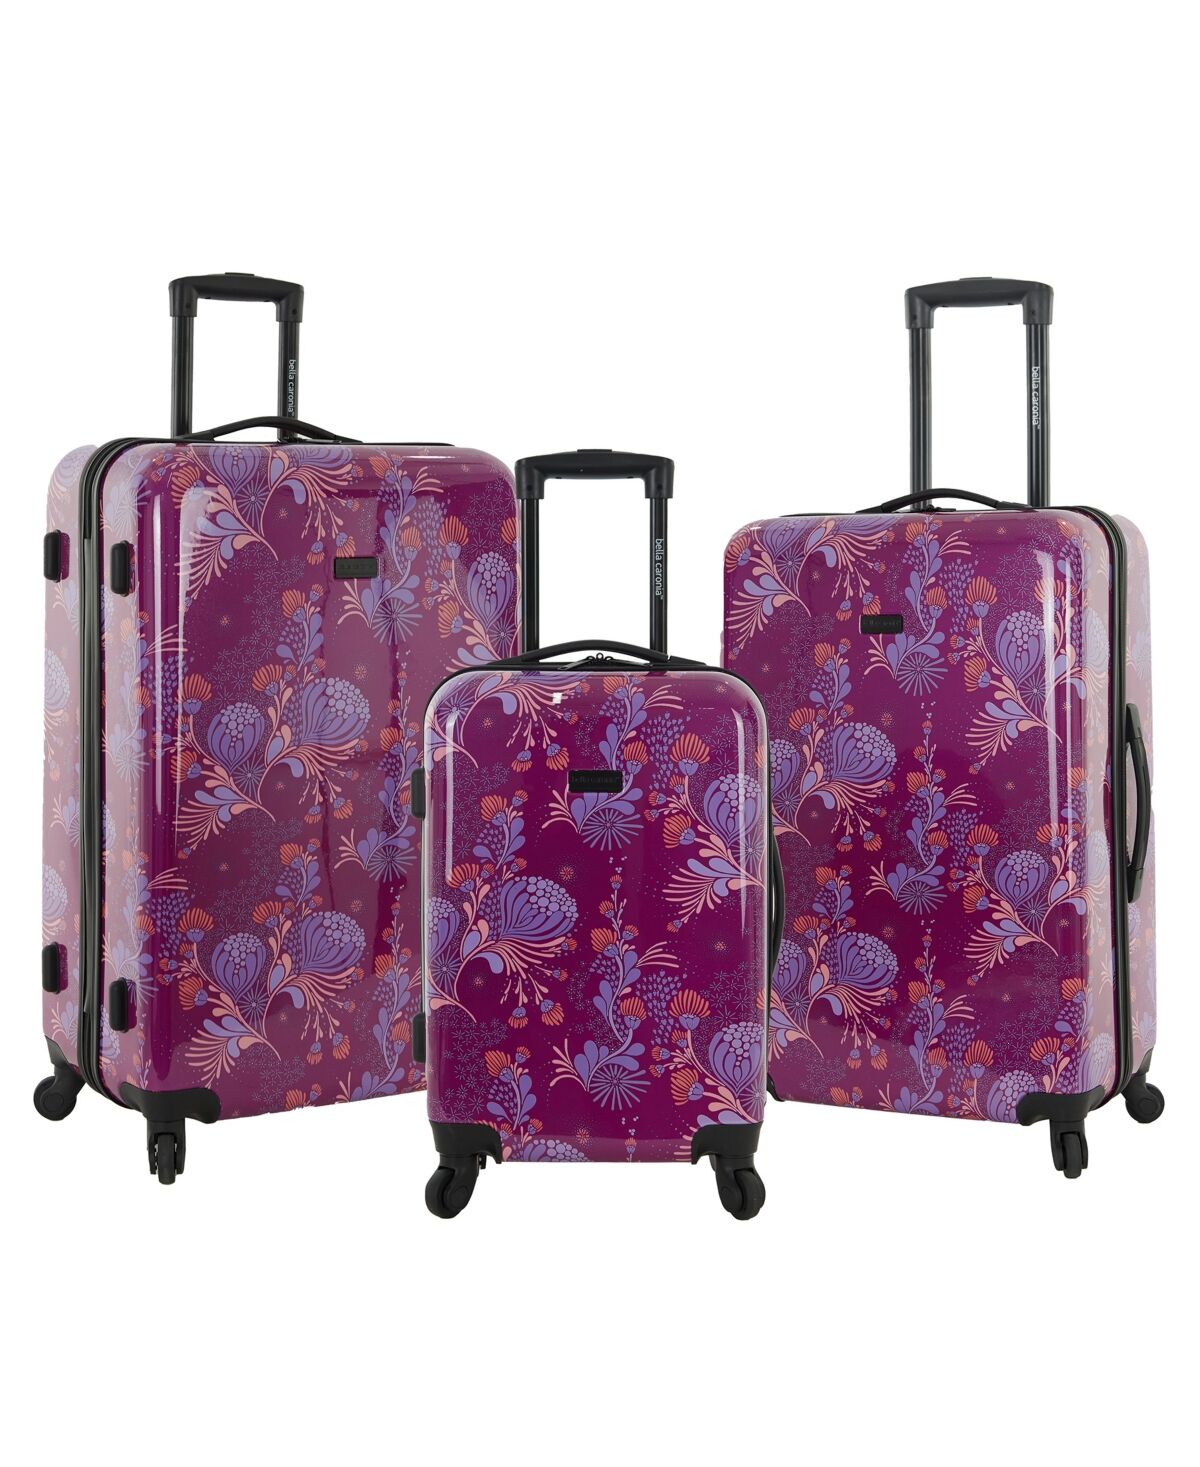 Bella Caronia 3 Piece Rolling Hardside Luggage Set with 4 Wheel Spinners - Style Floral